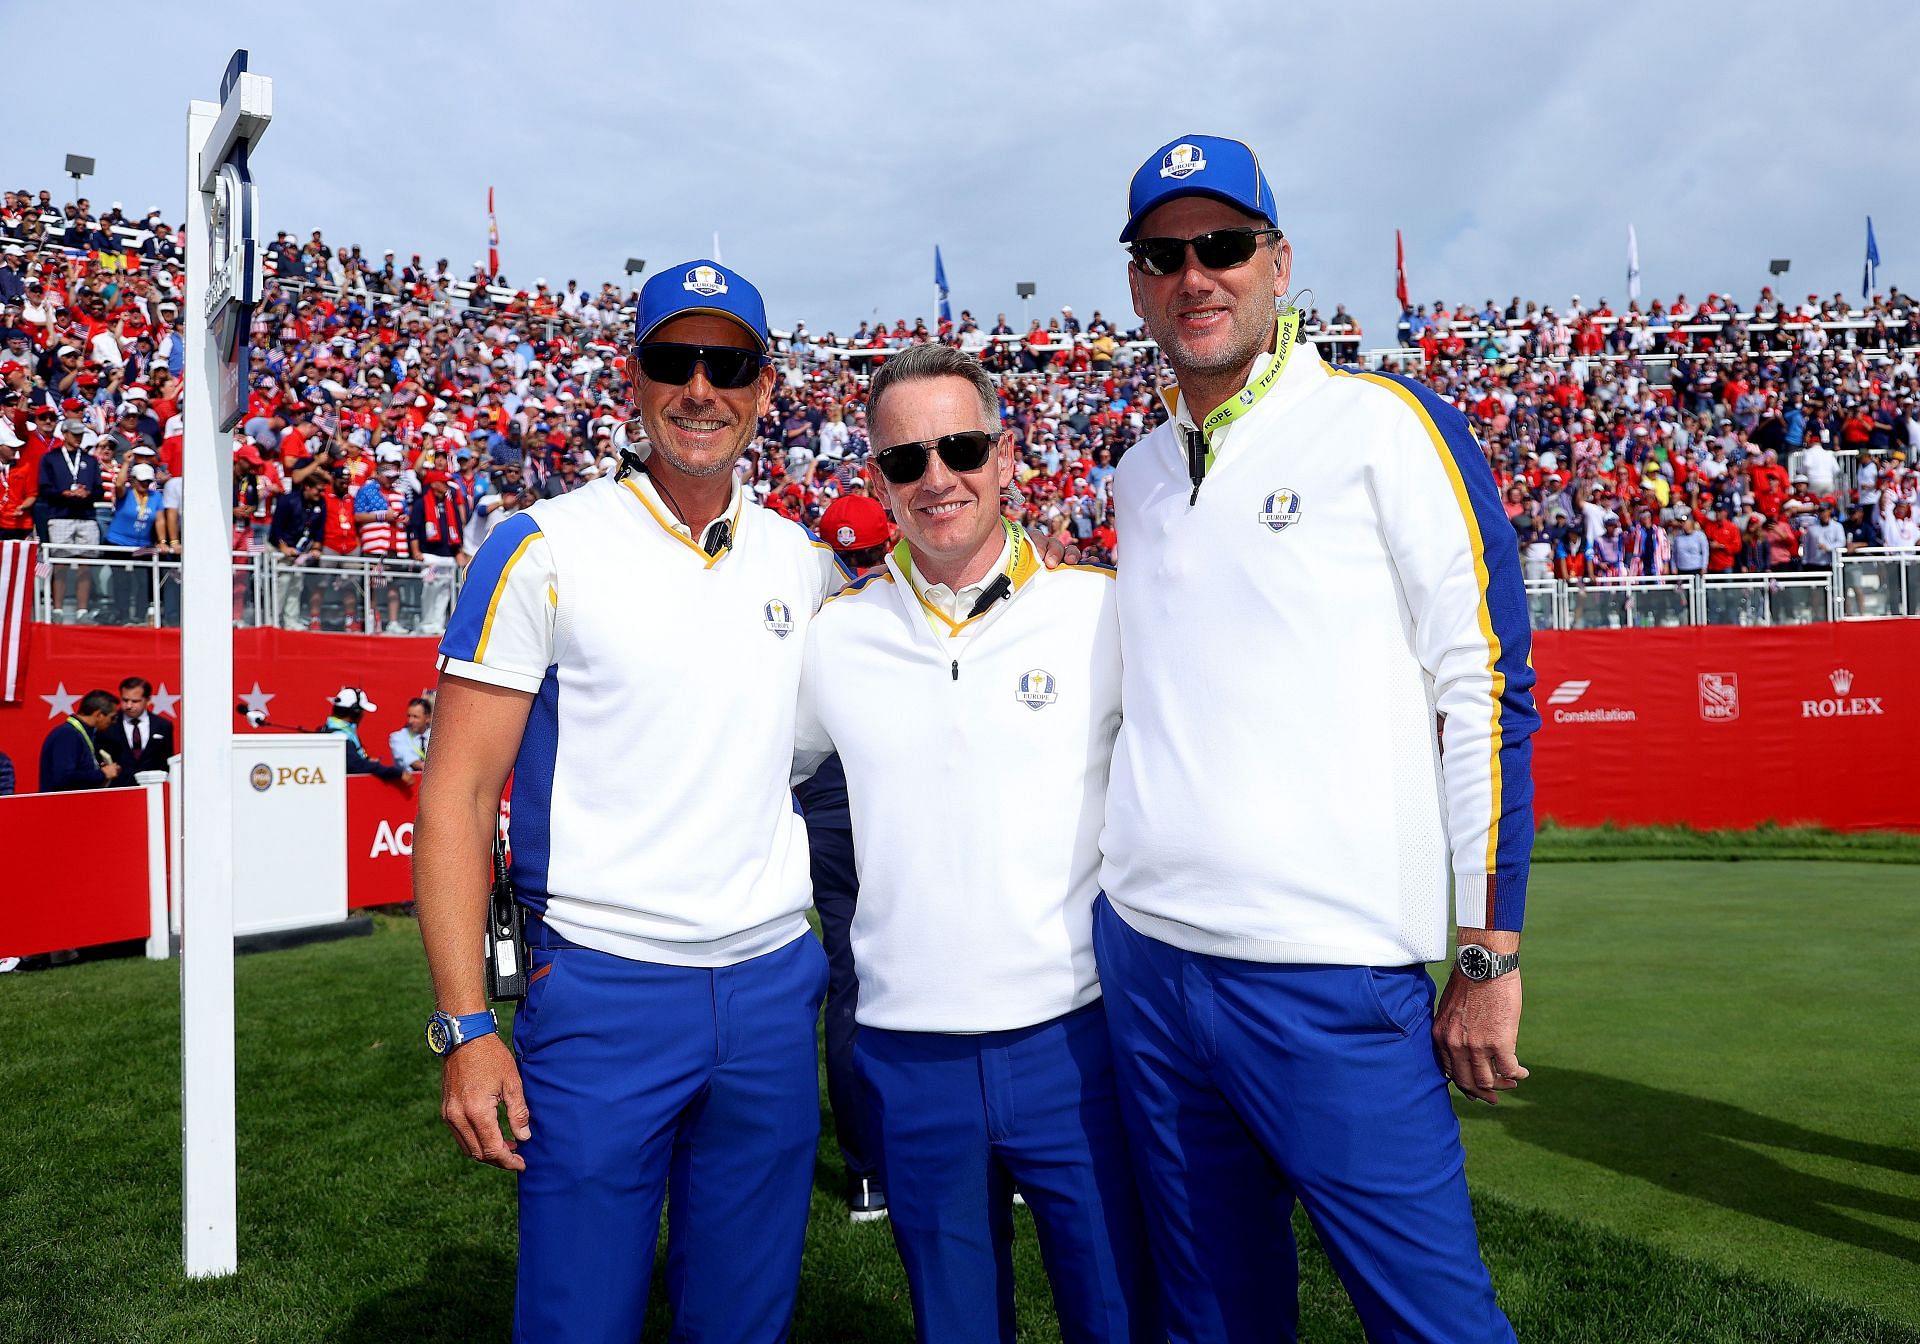 Luke Donald and Henrik Stenson at the 43rd Ryder Cup - Singles Matches (Image via Andrew Redington/Getty Images)